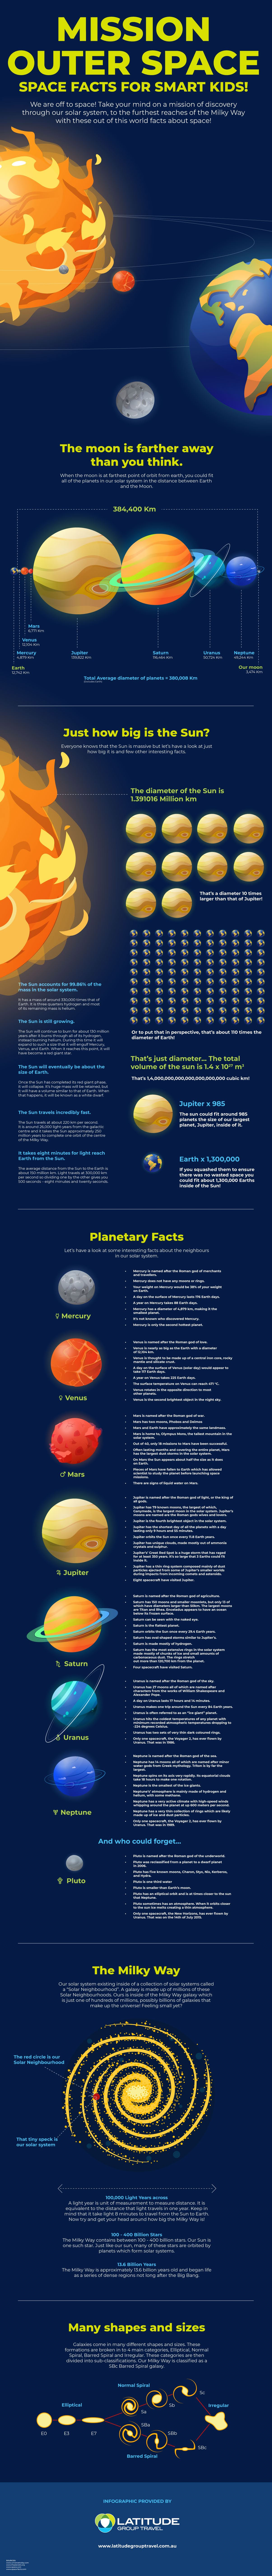 101 Space Facts For Smart Kids! #infographic